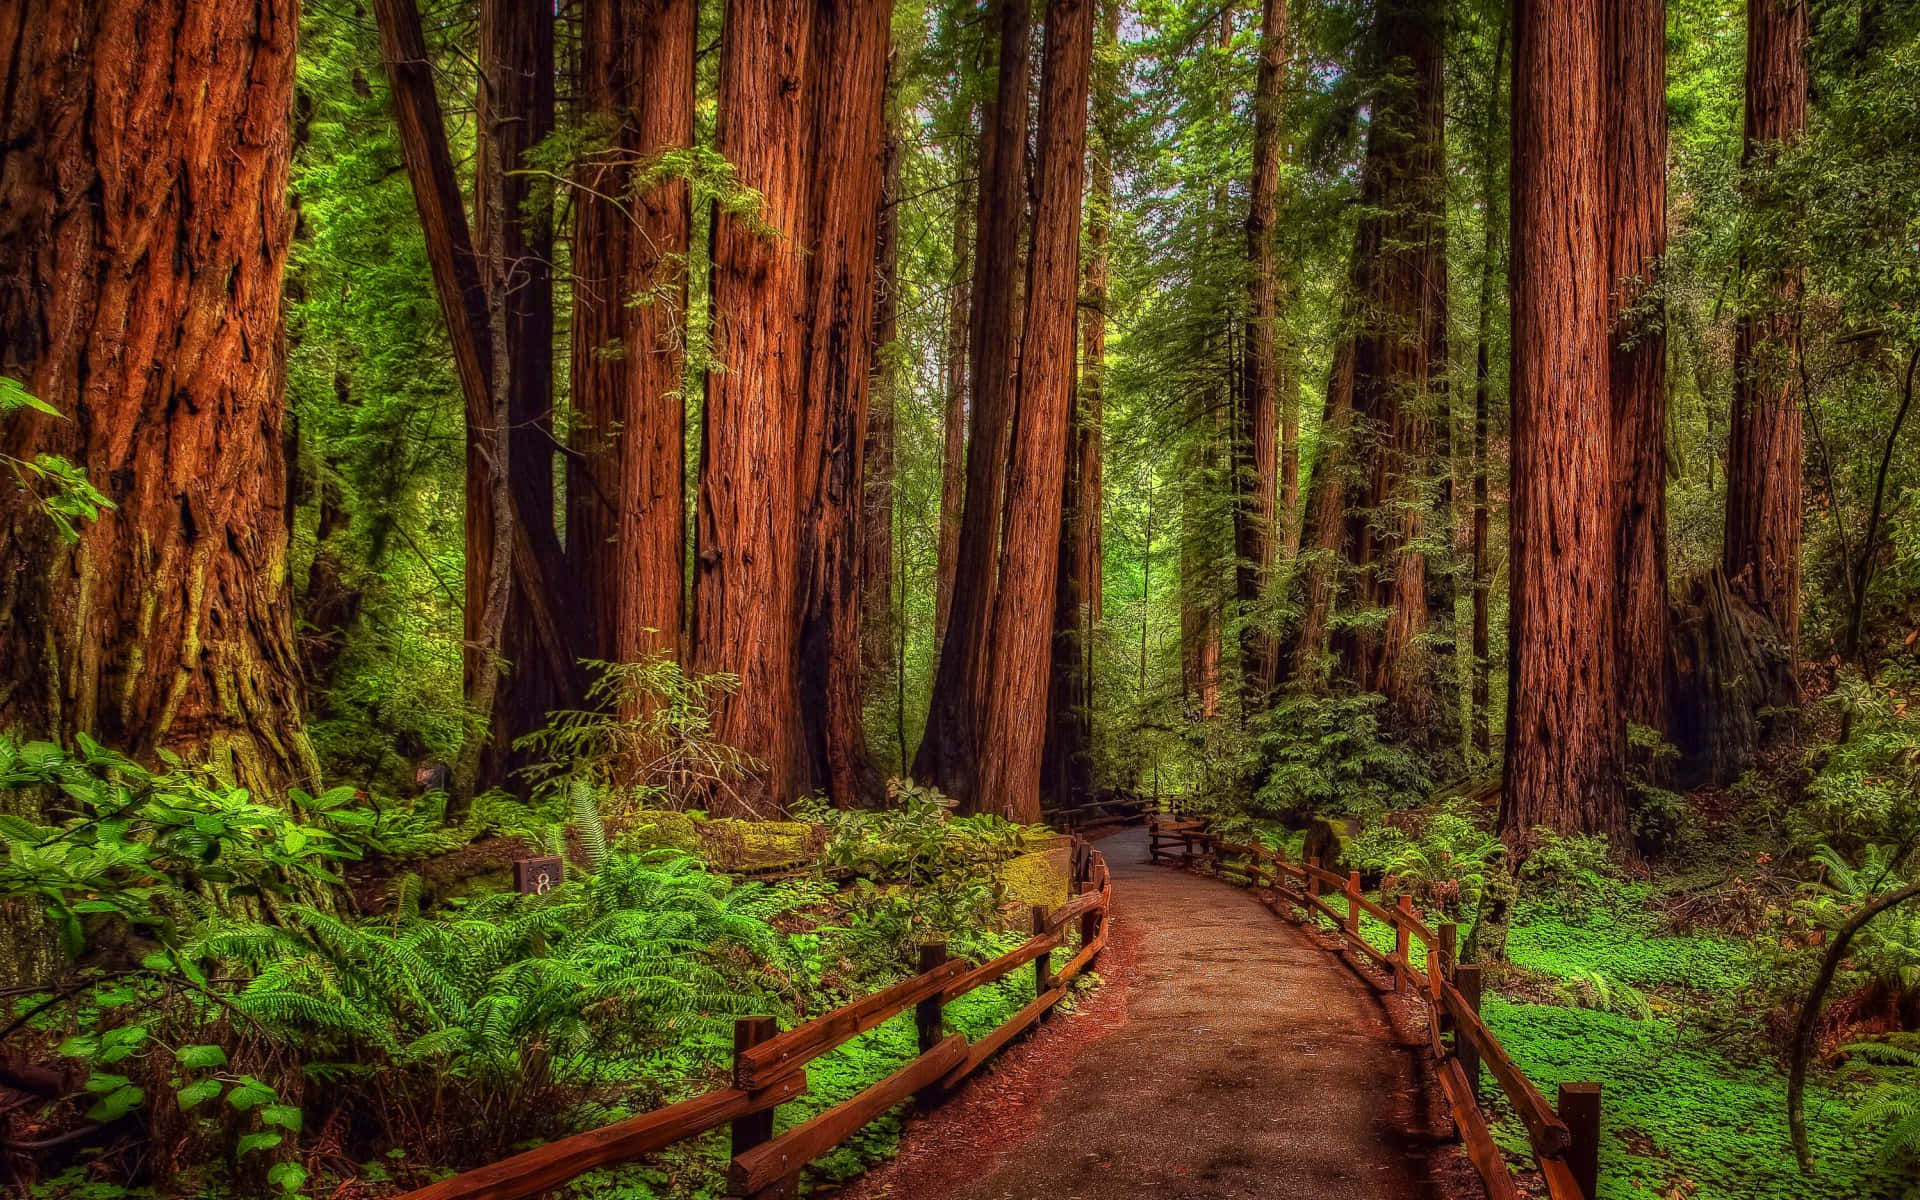 Towering redwood trees in California create a heavenly landscape